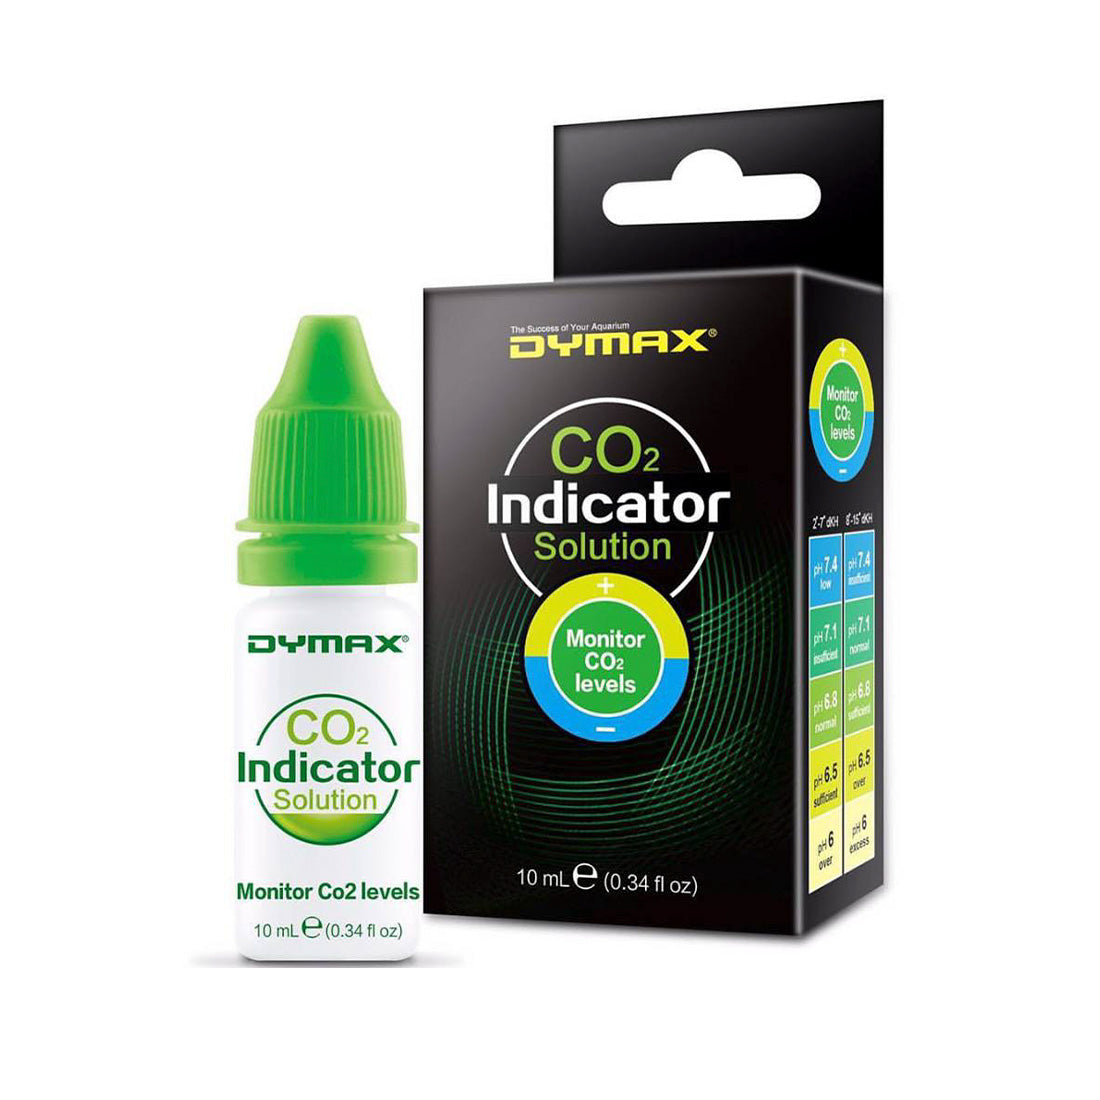 Co2 Indicator Solution